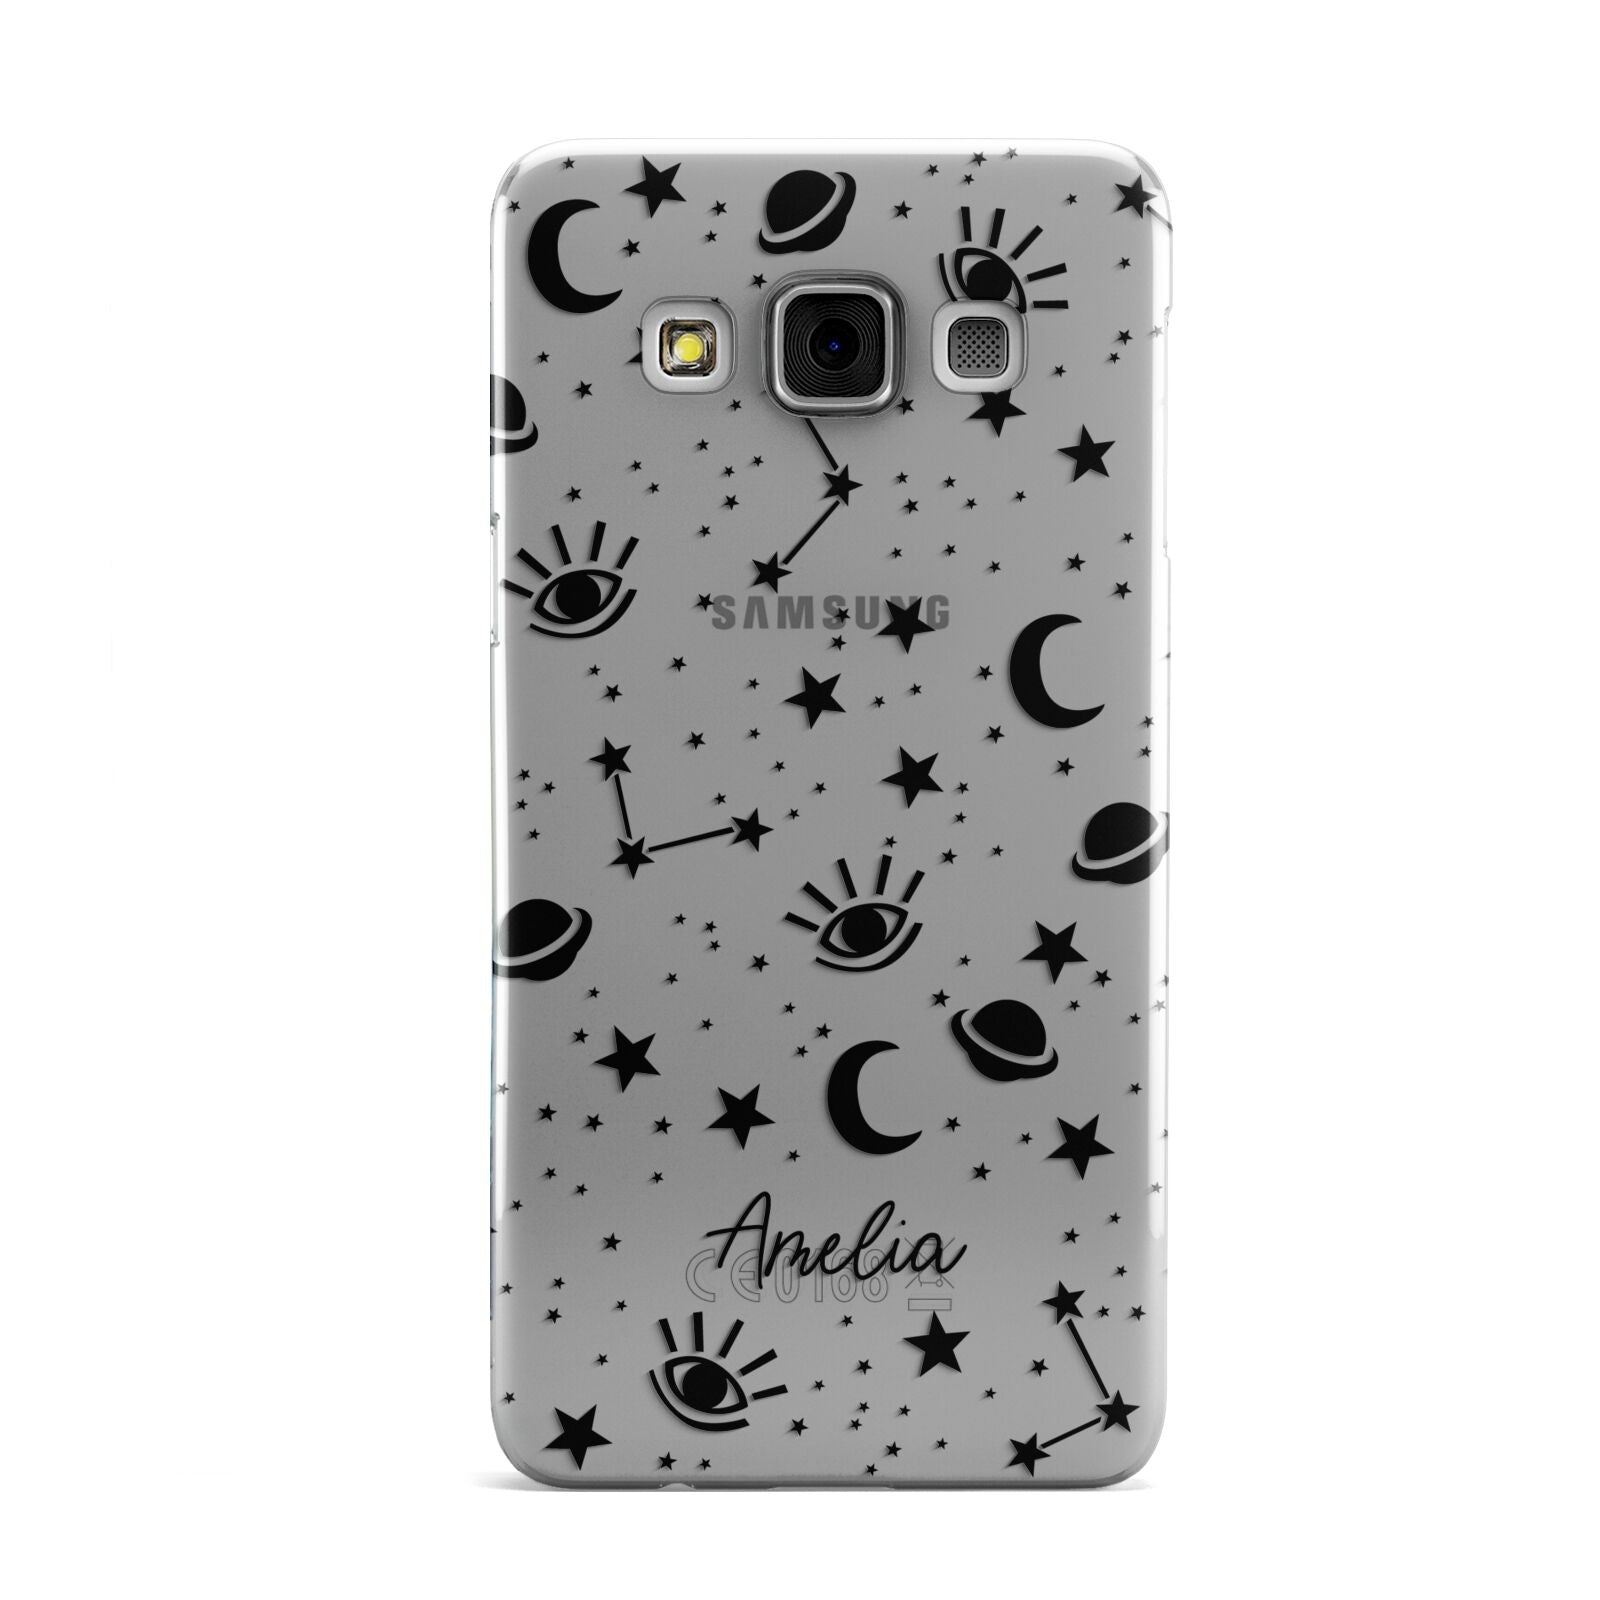 Monochrome Zodiac Constellations with Name Samsung Galaxy A3 Case